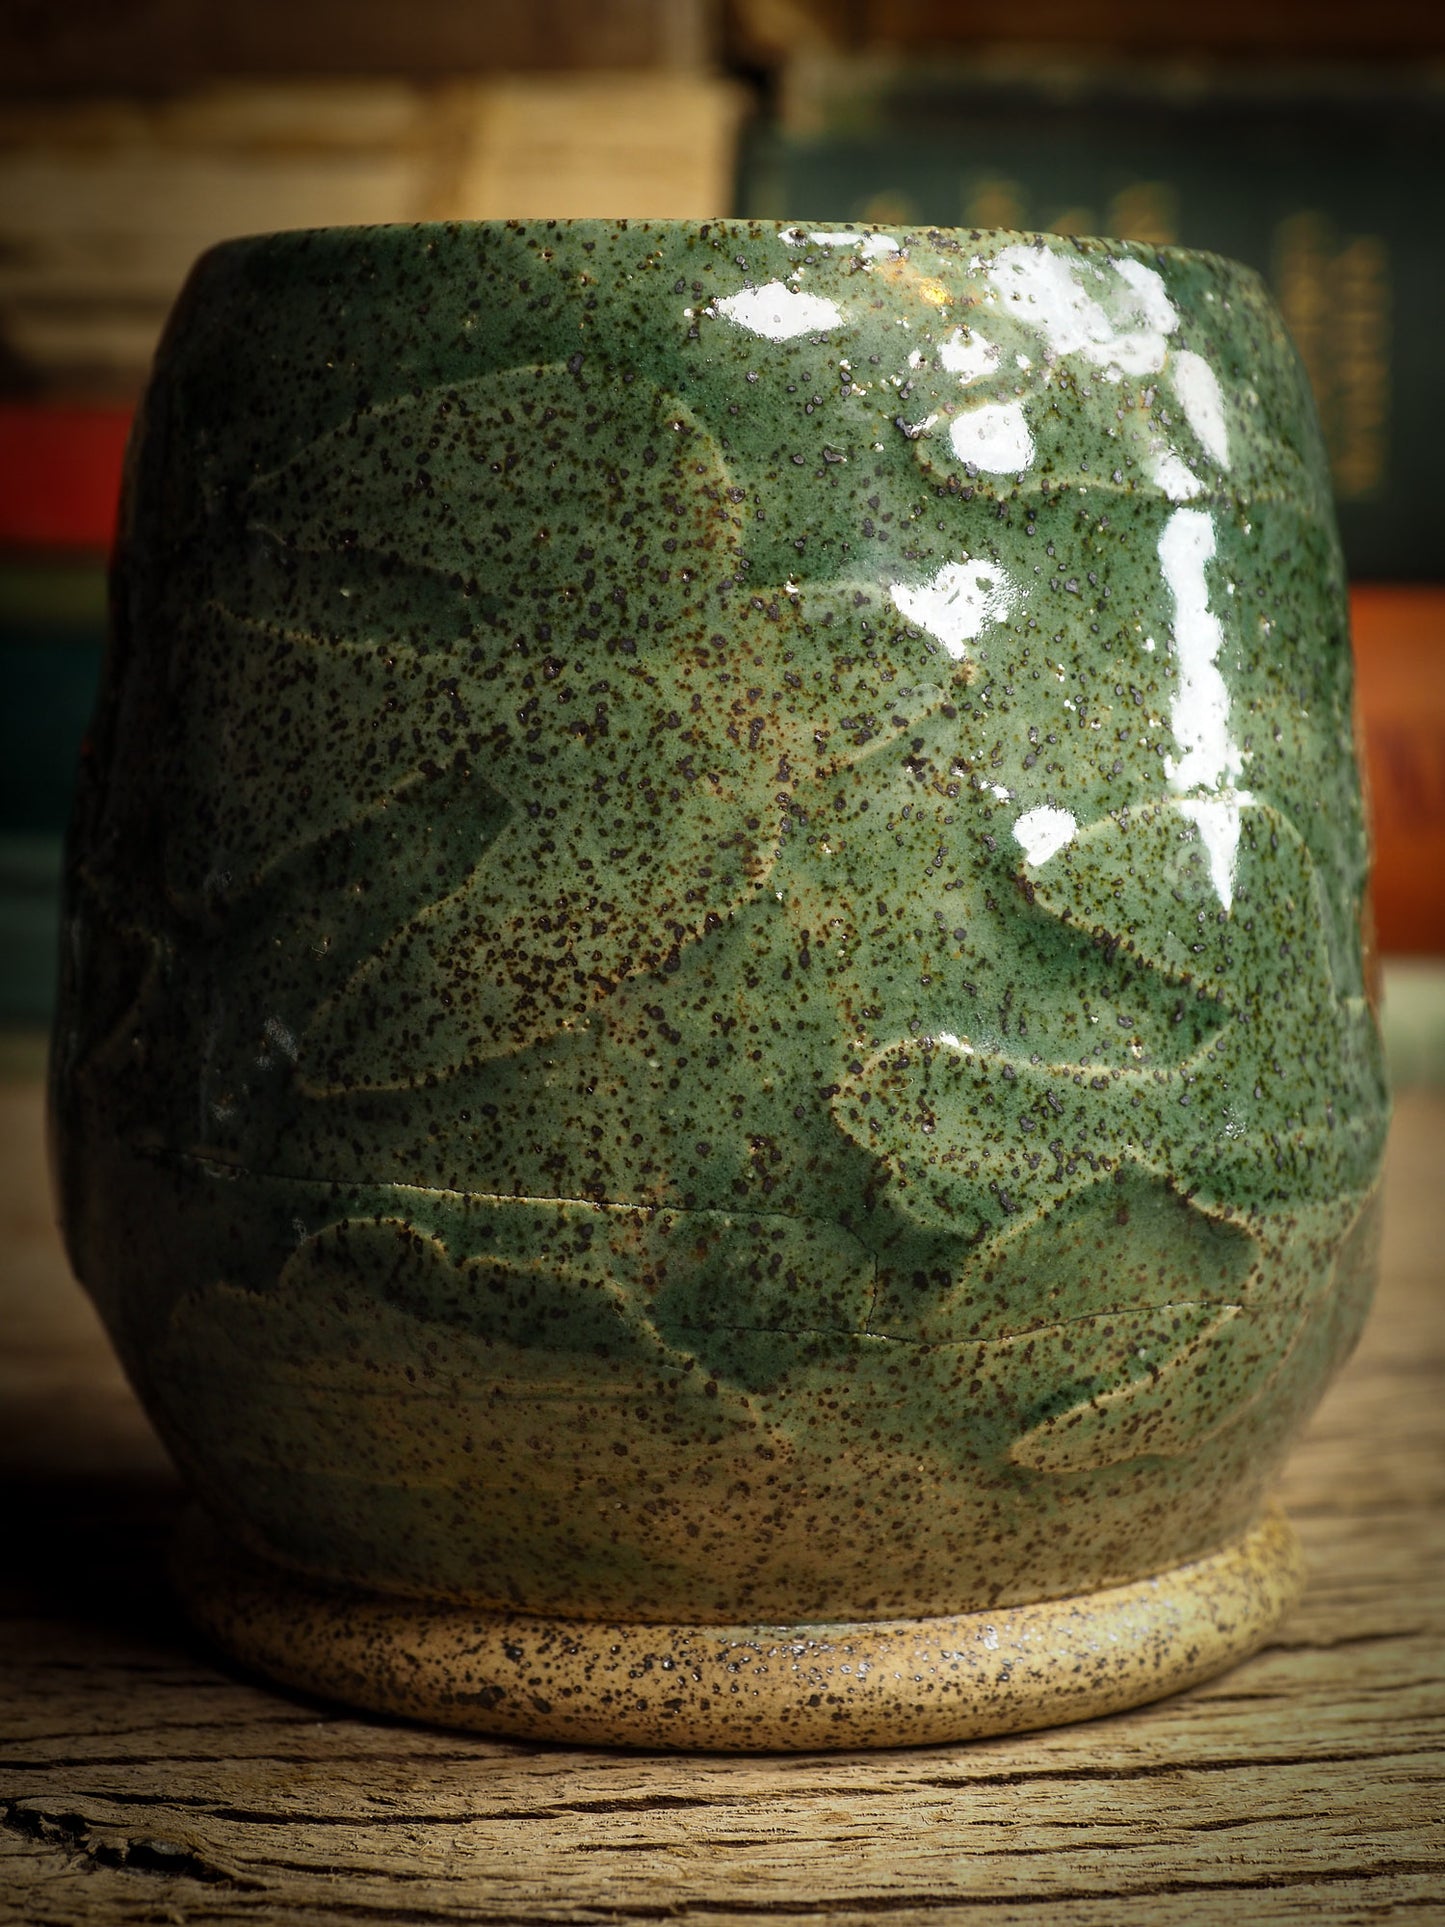 An original glazed ceramic jar by Idania Salcido, the artist behind Danita Art. It measures 2.5 x 2.5 x 3.5 Inches, with deep green hue glazes and hand decorated figures on the sides. Totally handmade in my studio, this is a unique piece that cannot be repeated. Food and drink safe, hand wash only.